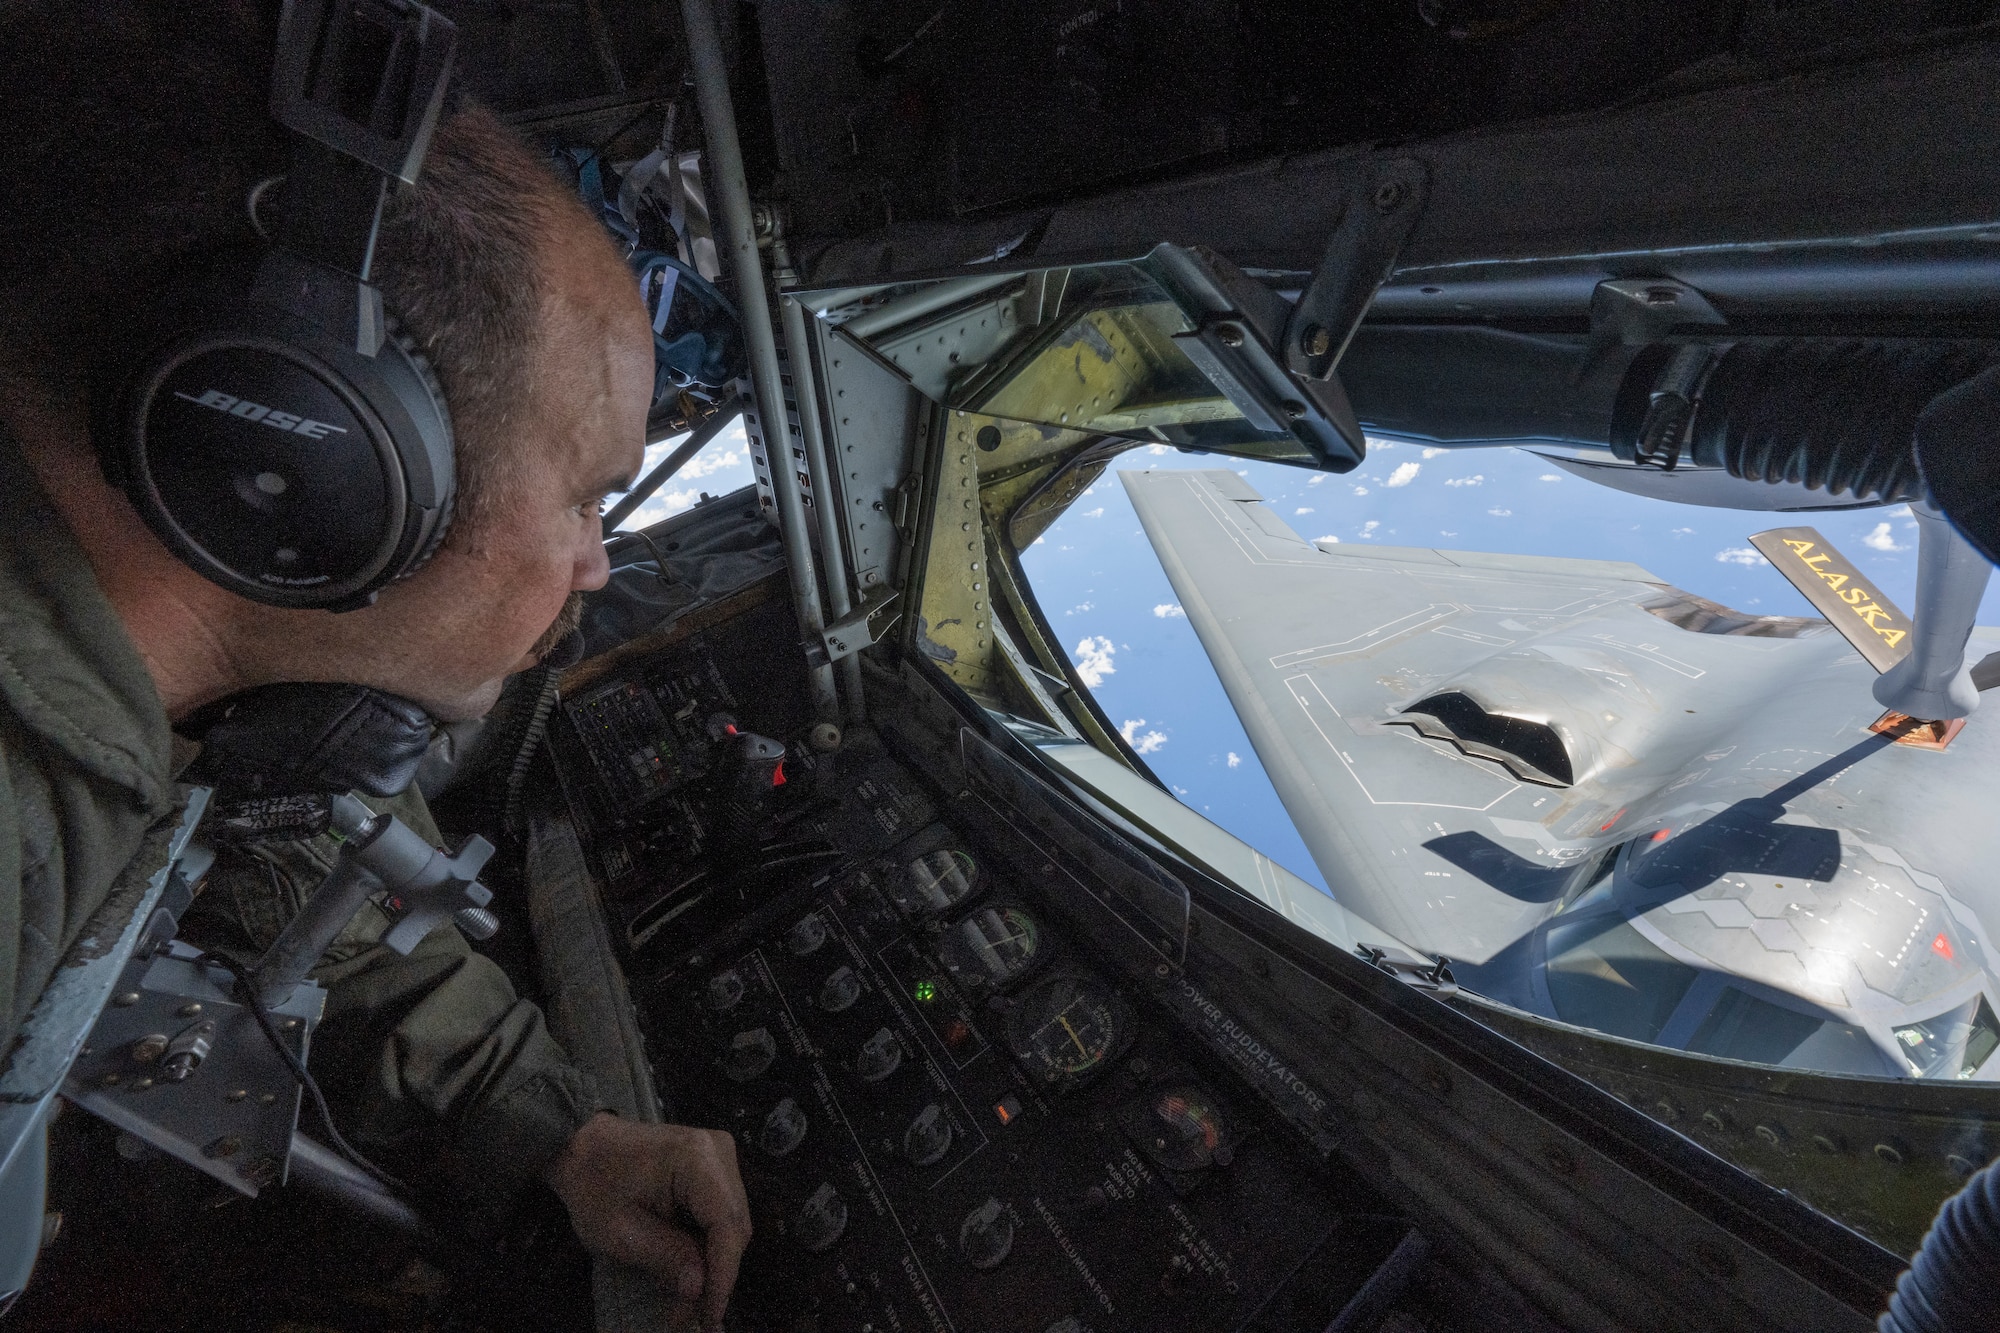 U.S. Air Force Senior Master Sgt. Wes Hudnall, Alaska Air National Guard KC-135 Stratotanker boom operator conducts aerial refueling operations for a B-2 Spirit during a training mission in the Indo-Pacific region, March 23, 2022. During the more than 50-hour round-trip trek to Australia and back, the B-2 received aerial refueling from numerous tanker aircraft—ensuring the mission was successful and further demonstrating the U.S. Air Forces’ global strike capabilities. (U.S. Air Force photo by Tech. Sgt. Hailey Haux)